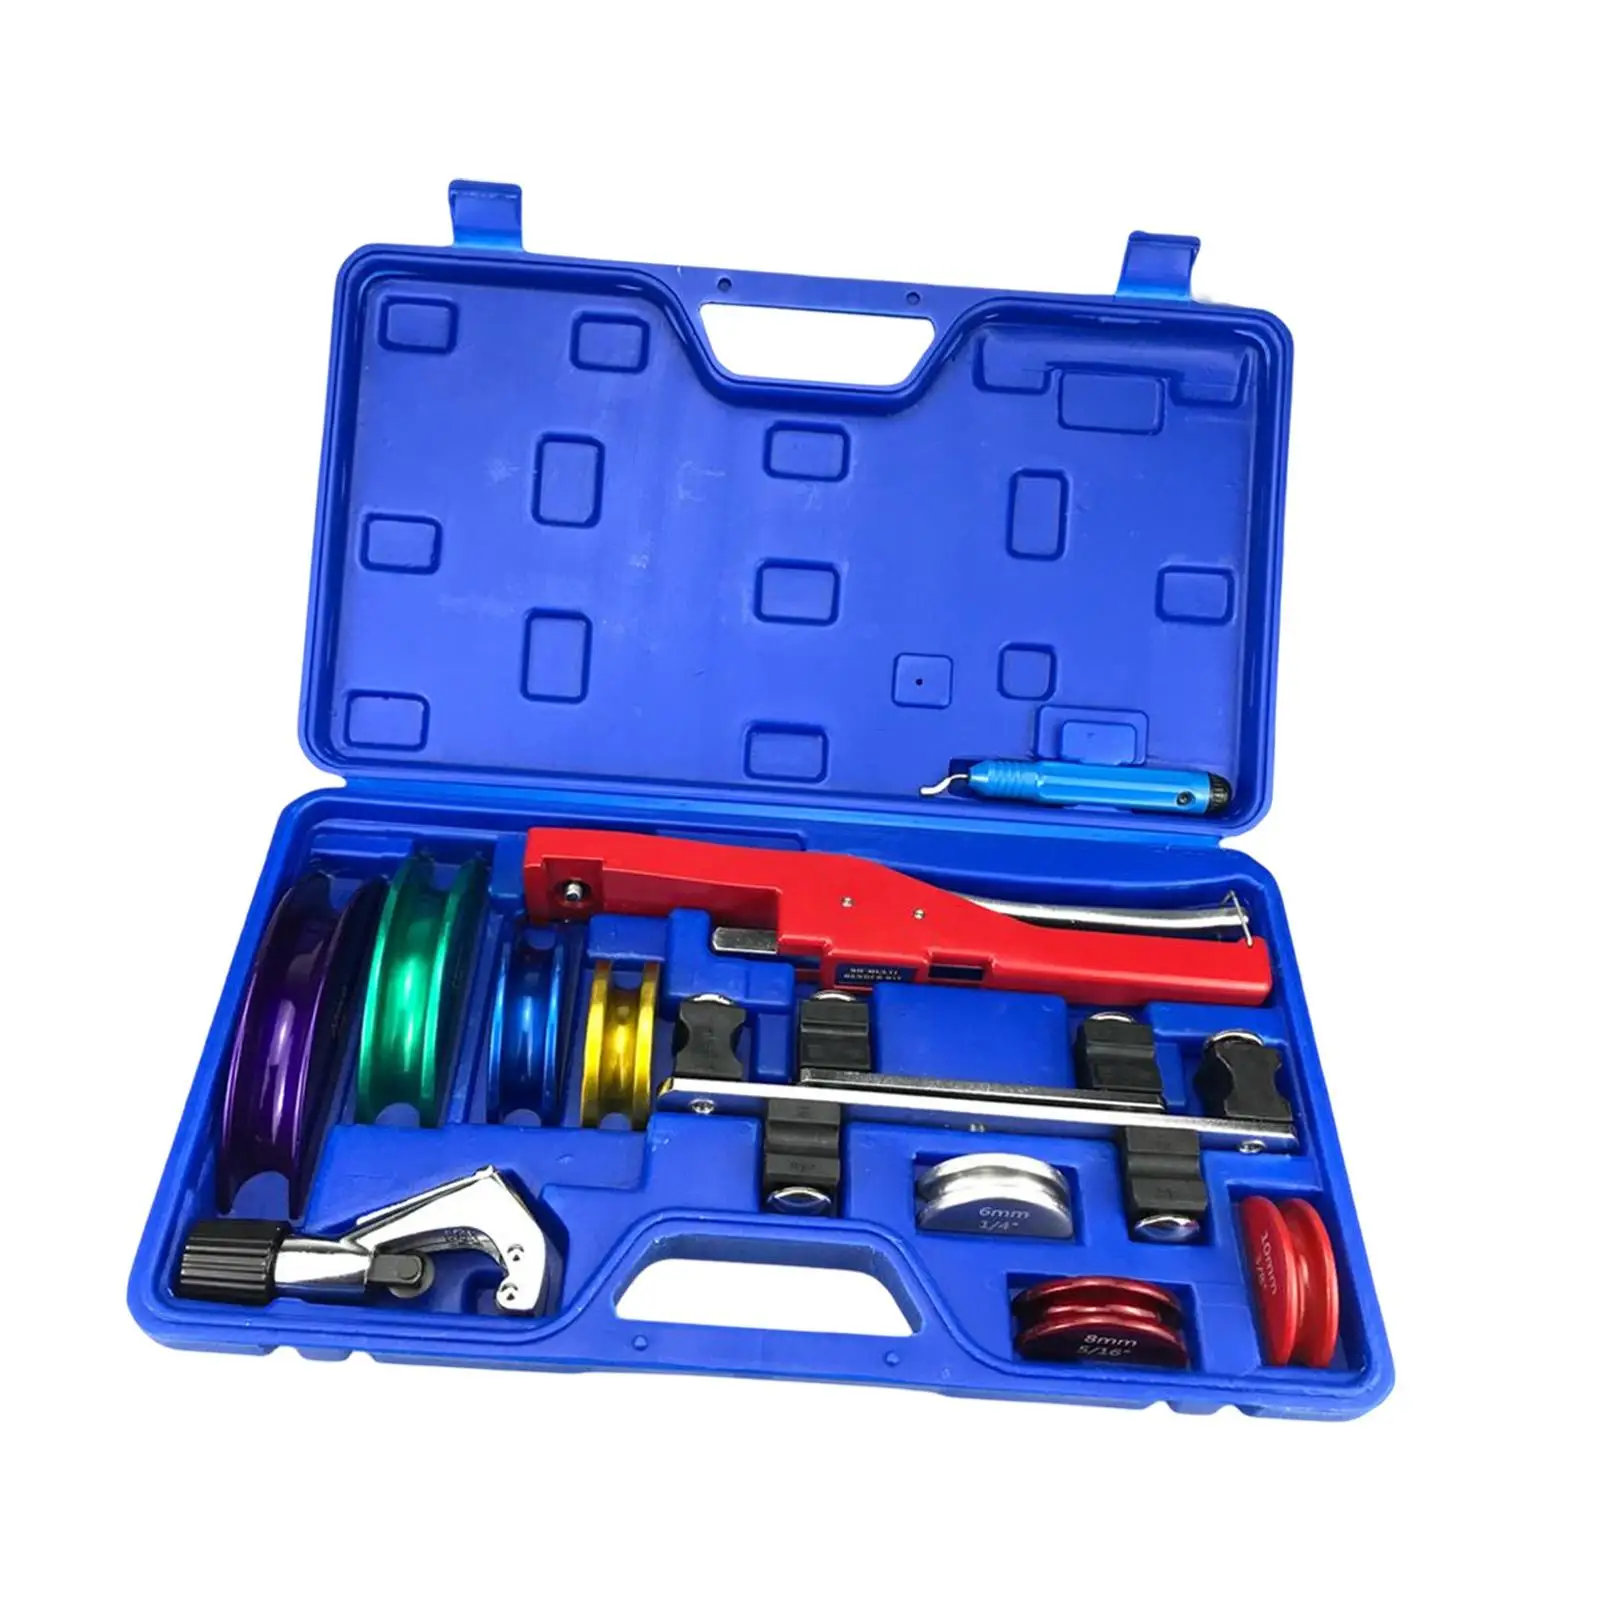 Pipe Bender Kits Durable Ergonomic Design ct 999F 1/4 to 7/8 inch Hand Tool for Aluminum Pipe Copper Pipe Threading Pipe